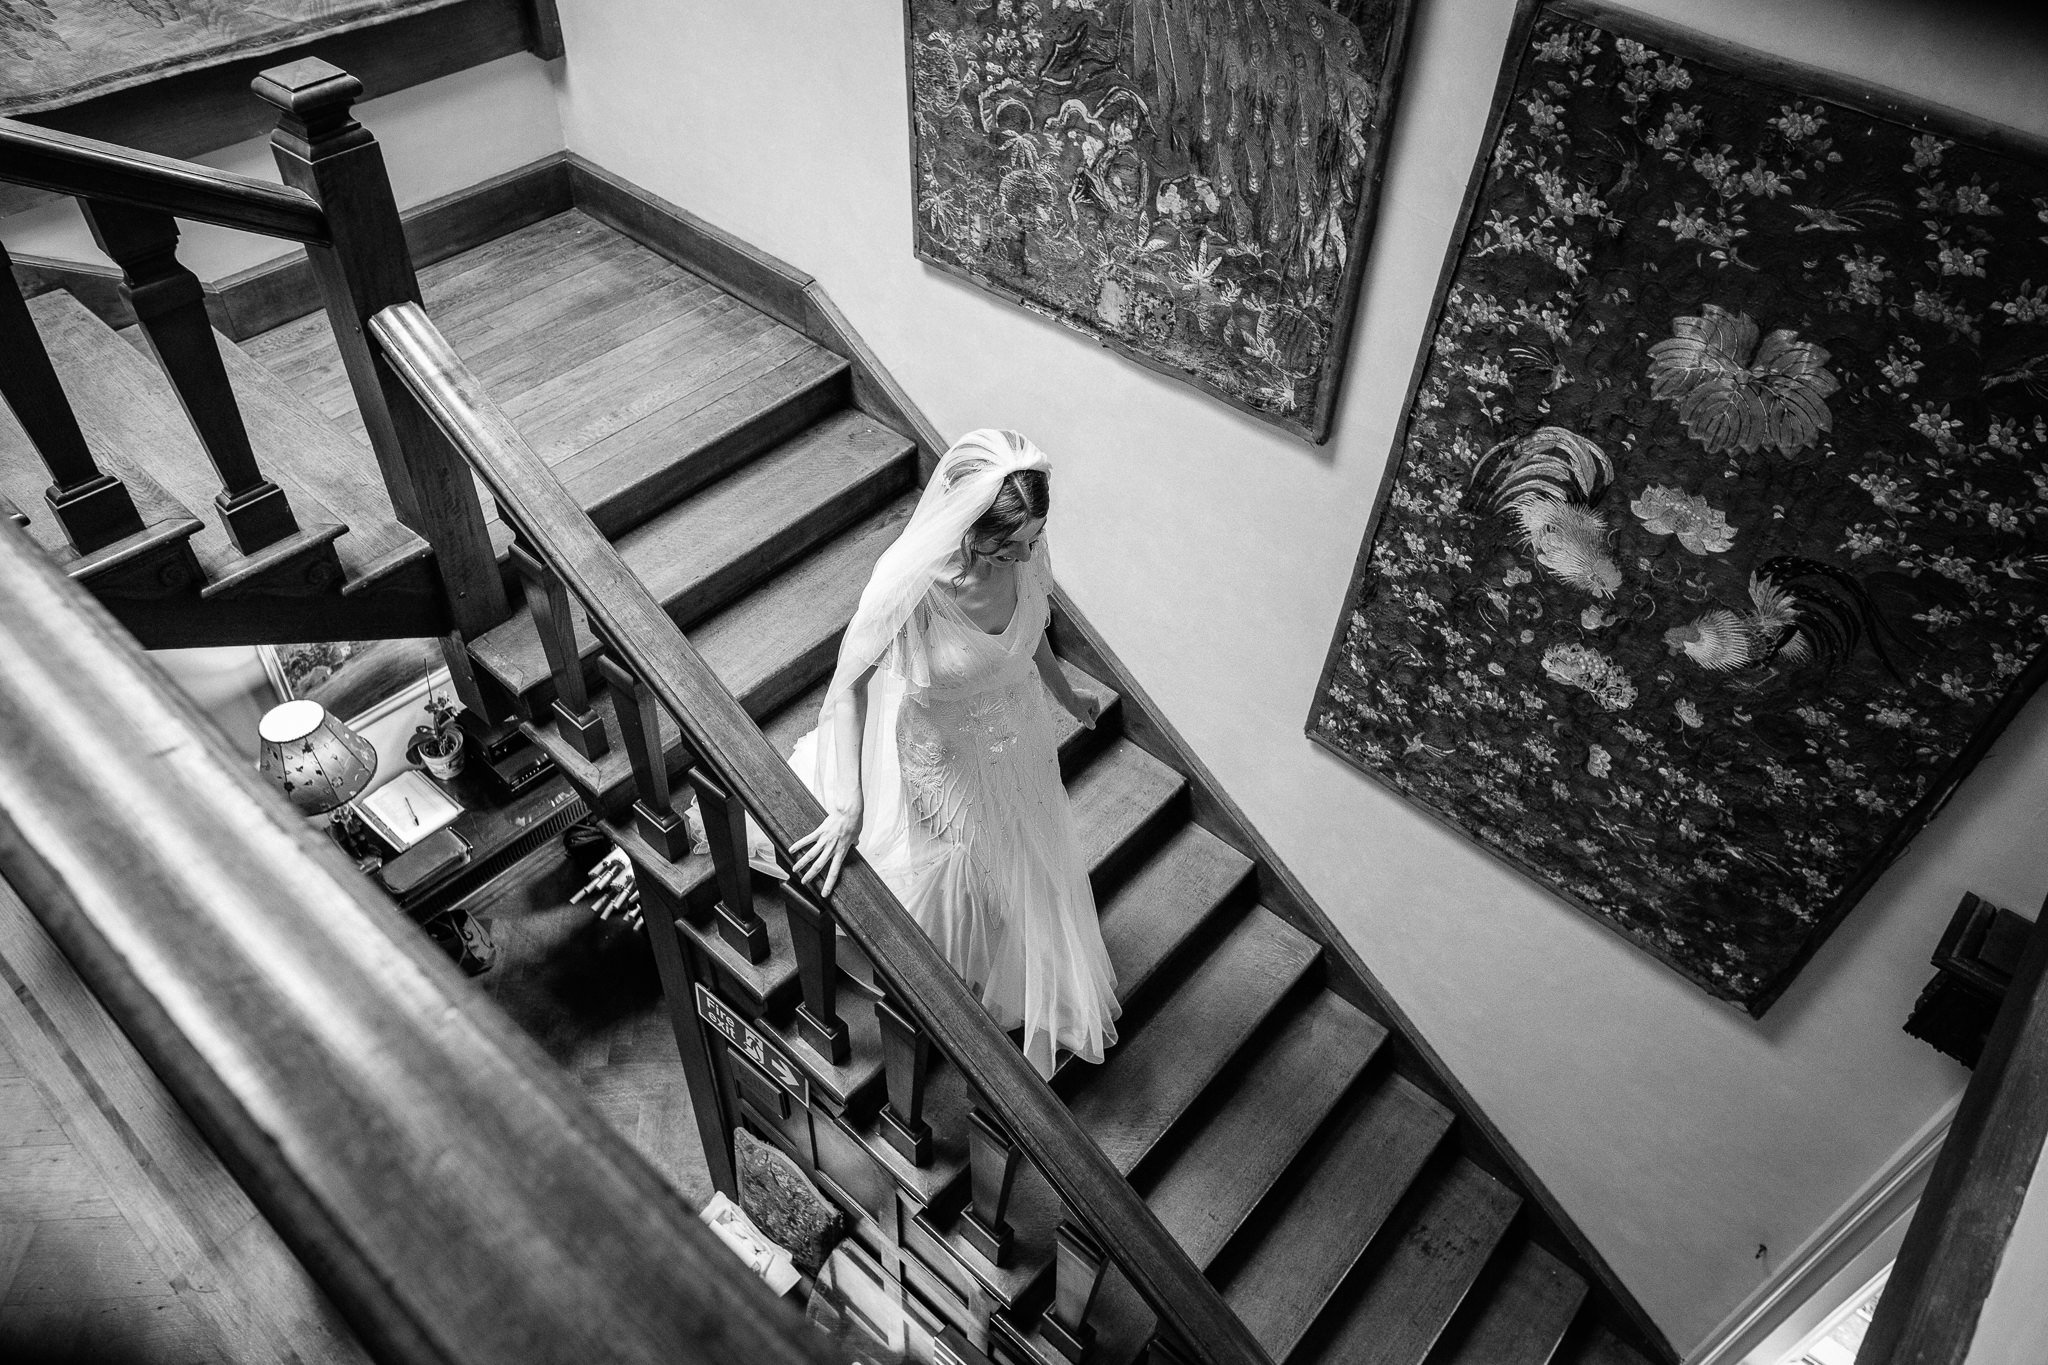  Bride descends the stairs in her wedding dress at  Wadhurst castle wedding venue 